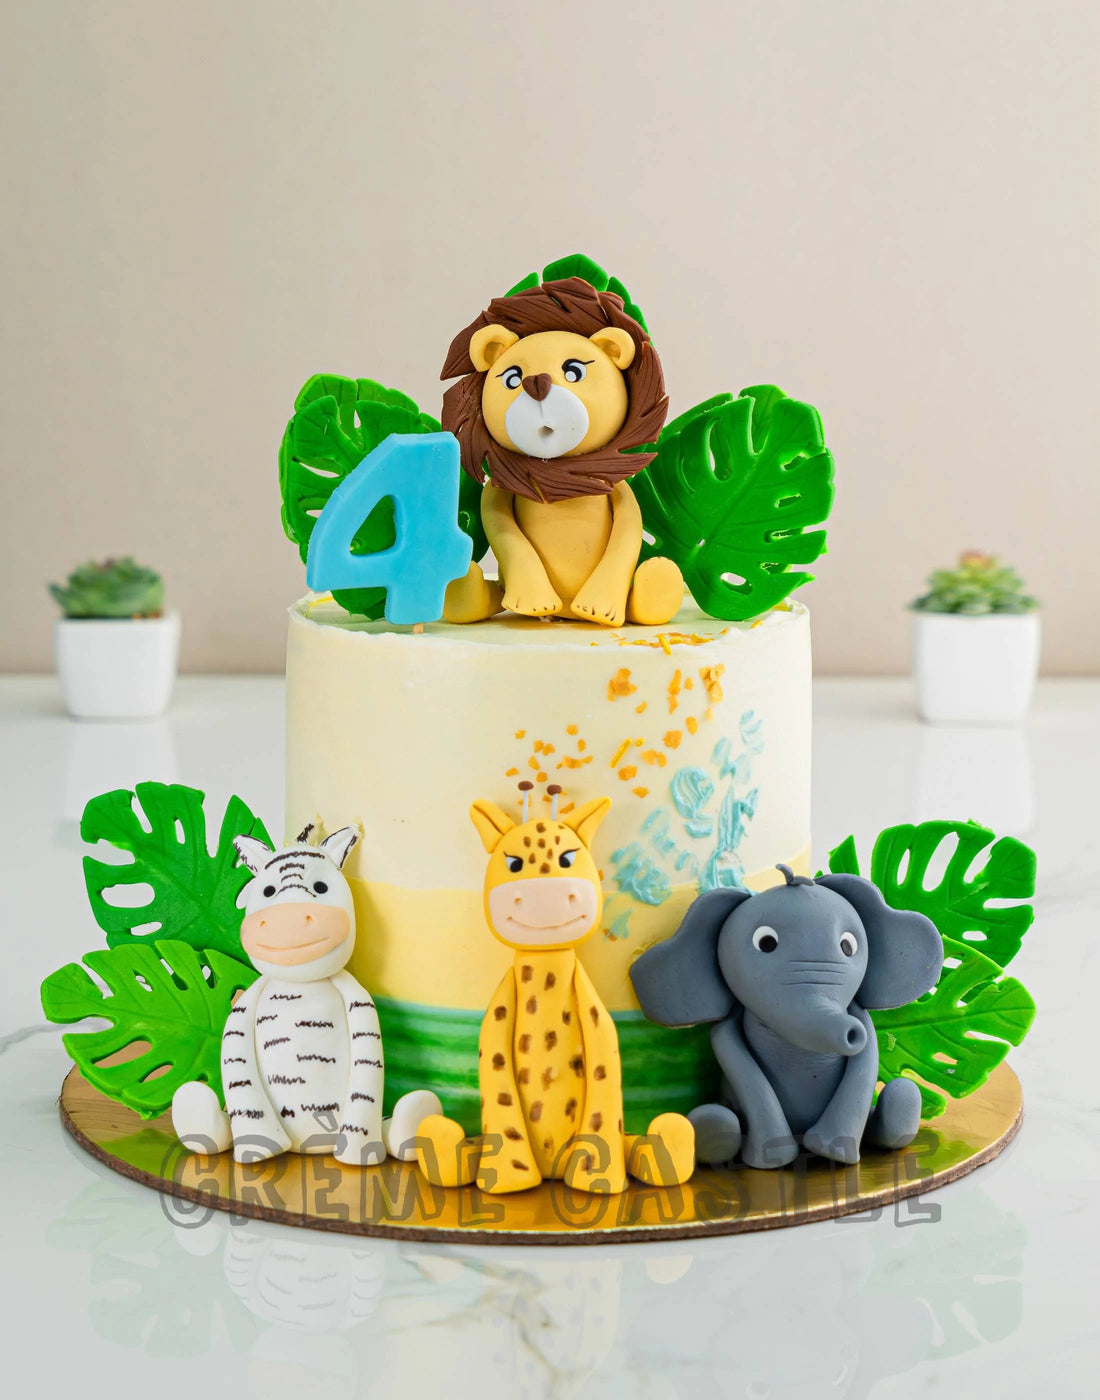 Jungle Cake in Tropic Theme by Creme Castle